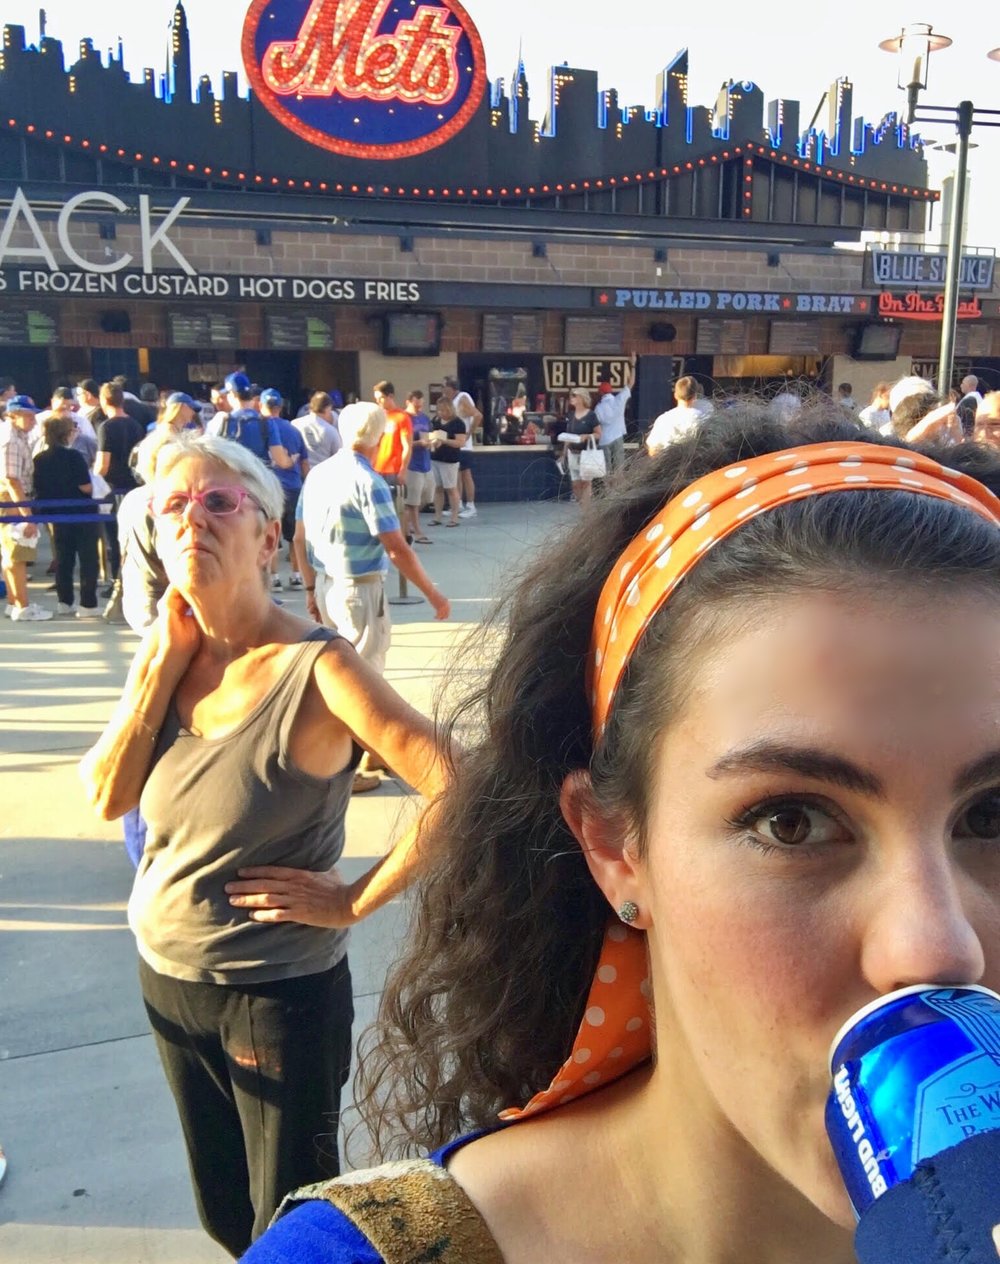 that lady behind me was upset because she wasn't drinking an ice cold bud light.